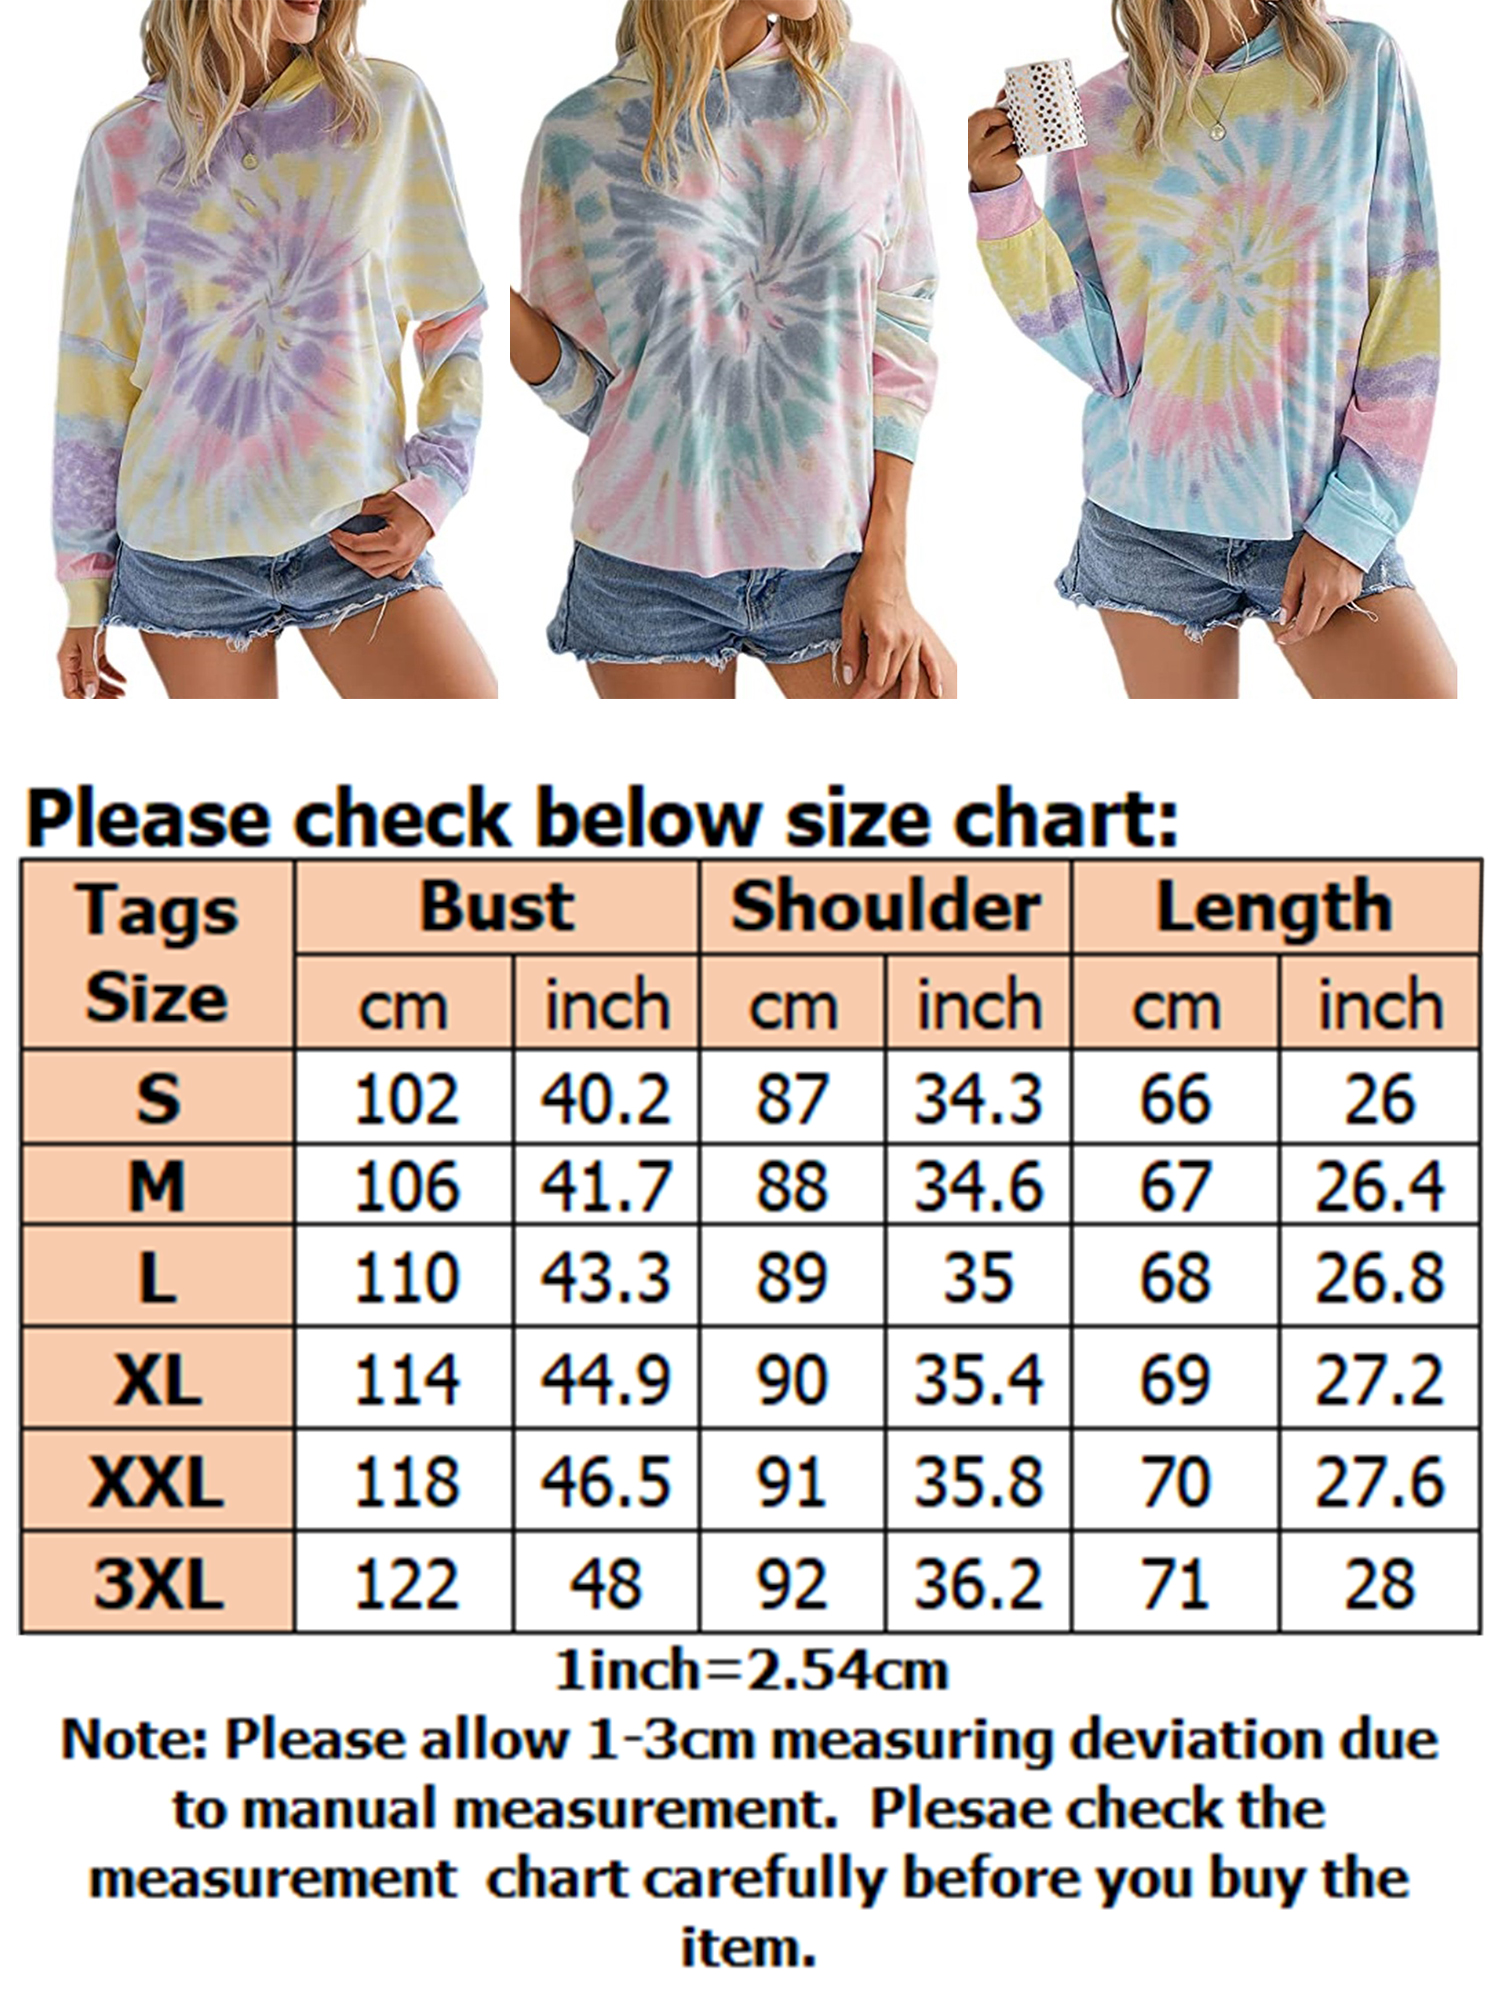 Sweatshirts for Women Gufindle Womens Long Sleeve Tops Plus Size Casual Loose Tie Dye Gradient Tees Pullover Top Shirts